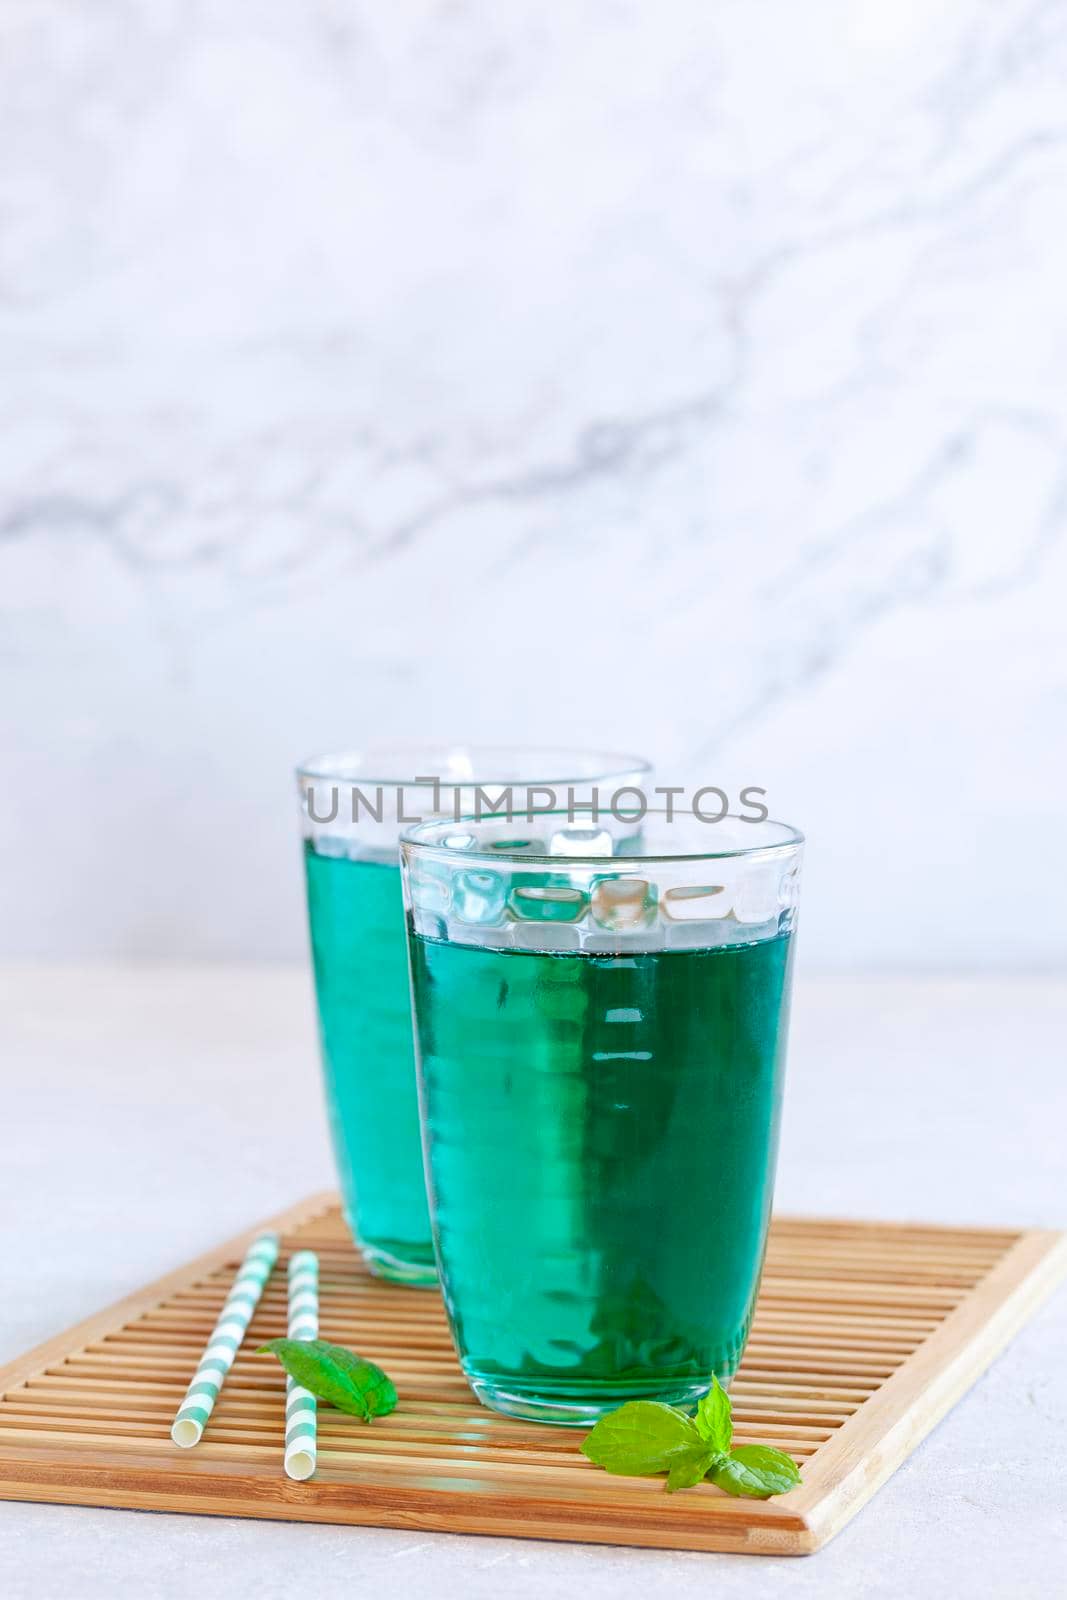 Diabolo menthe, french popular non-alcoholic summer cold drink, mix of mint syrup and limonade